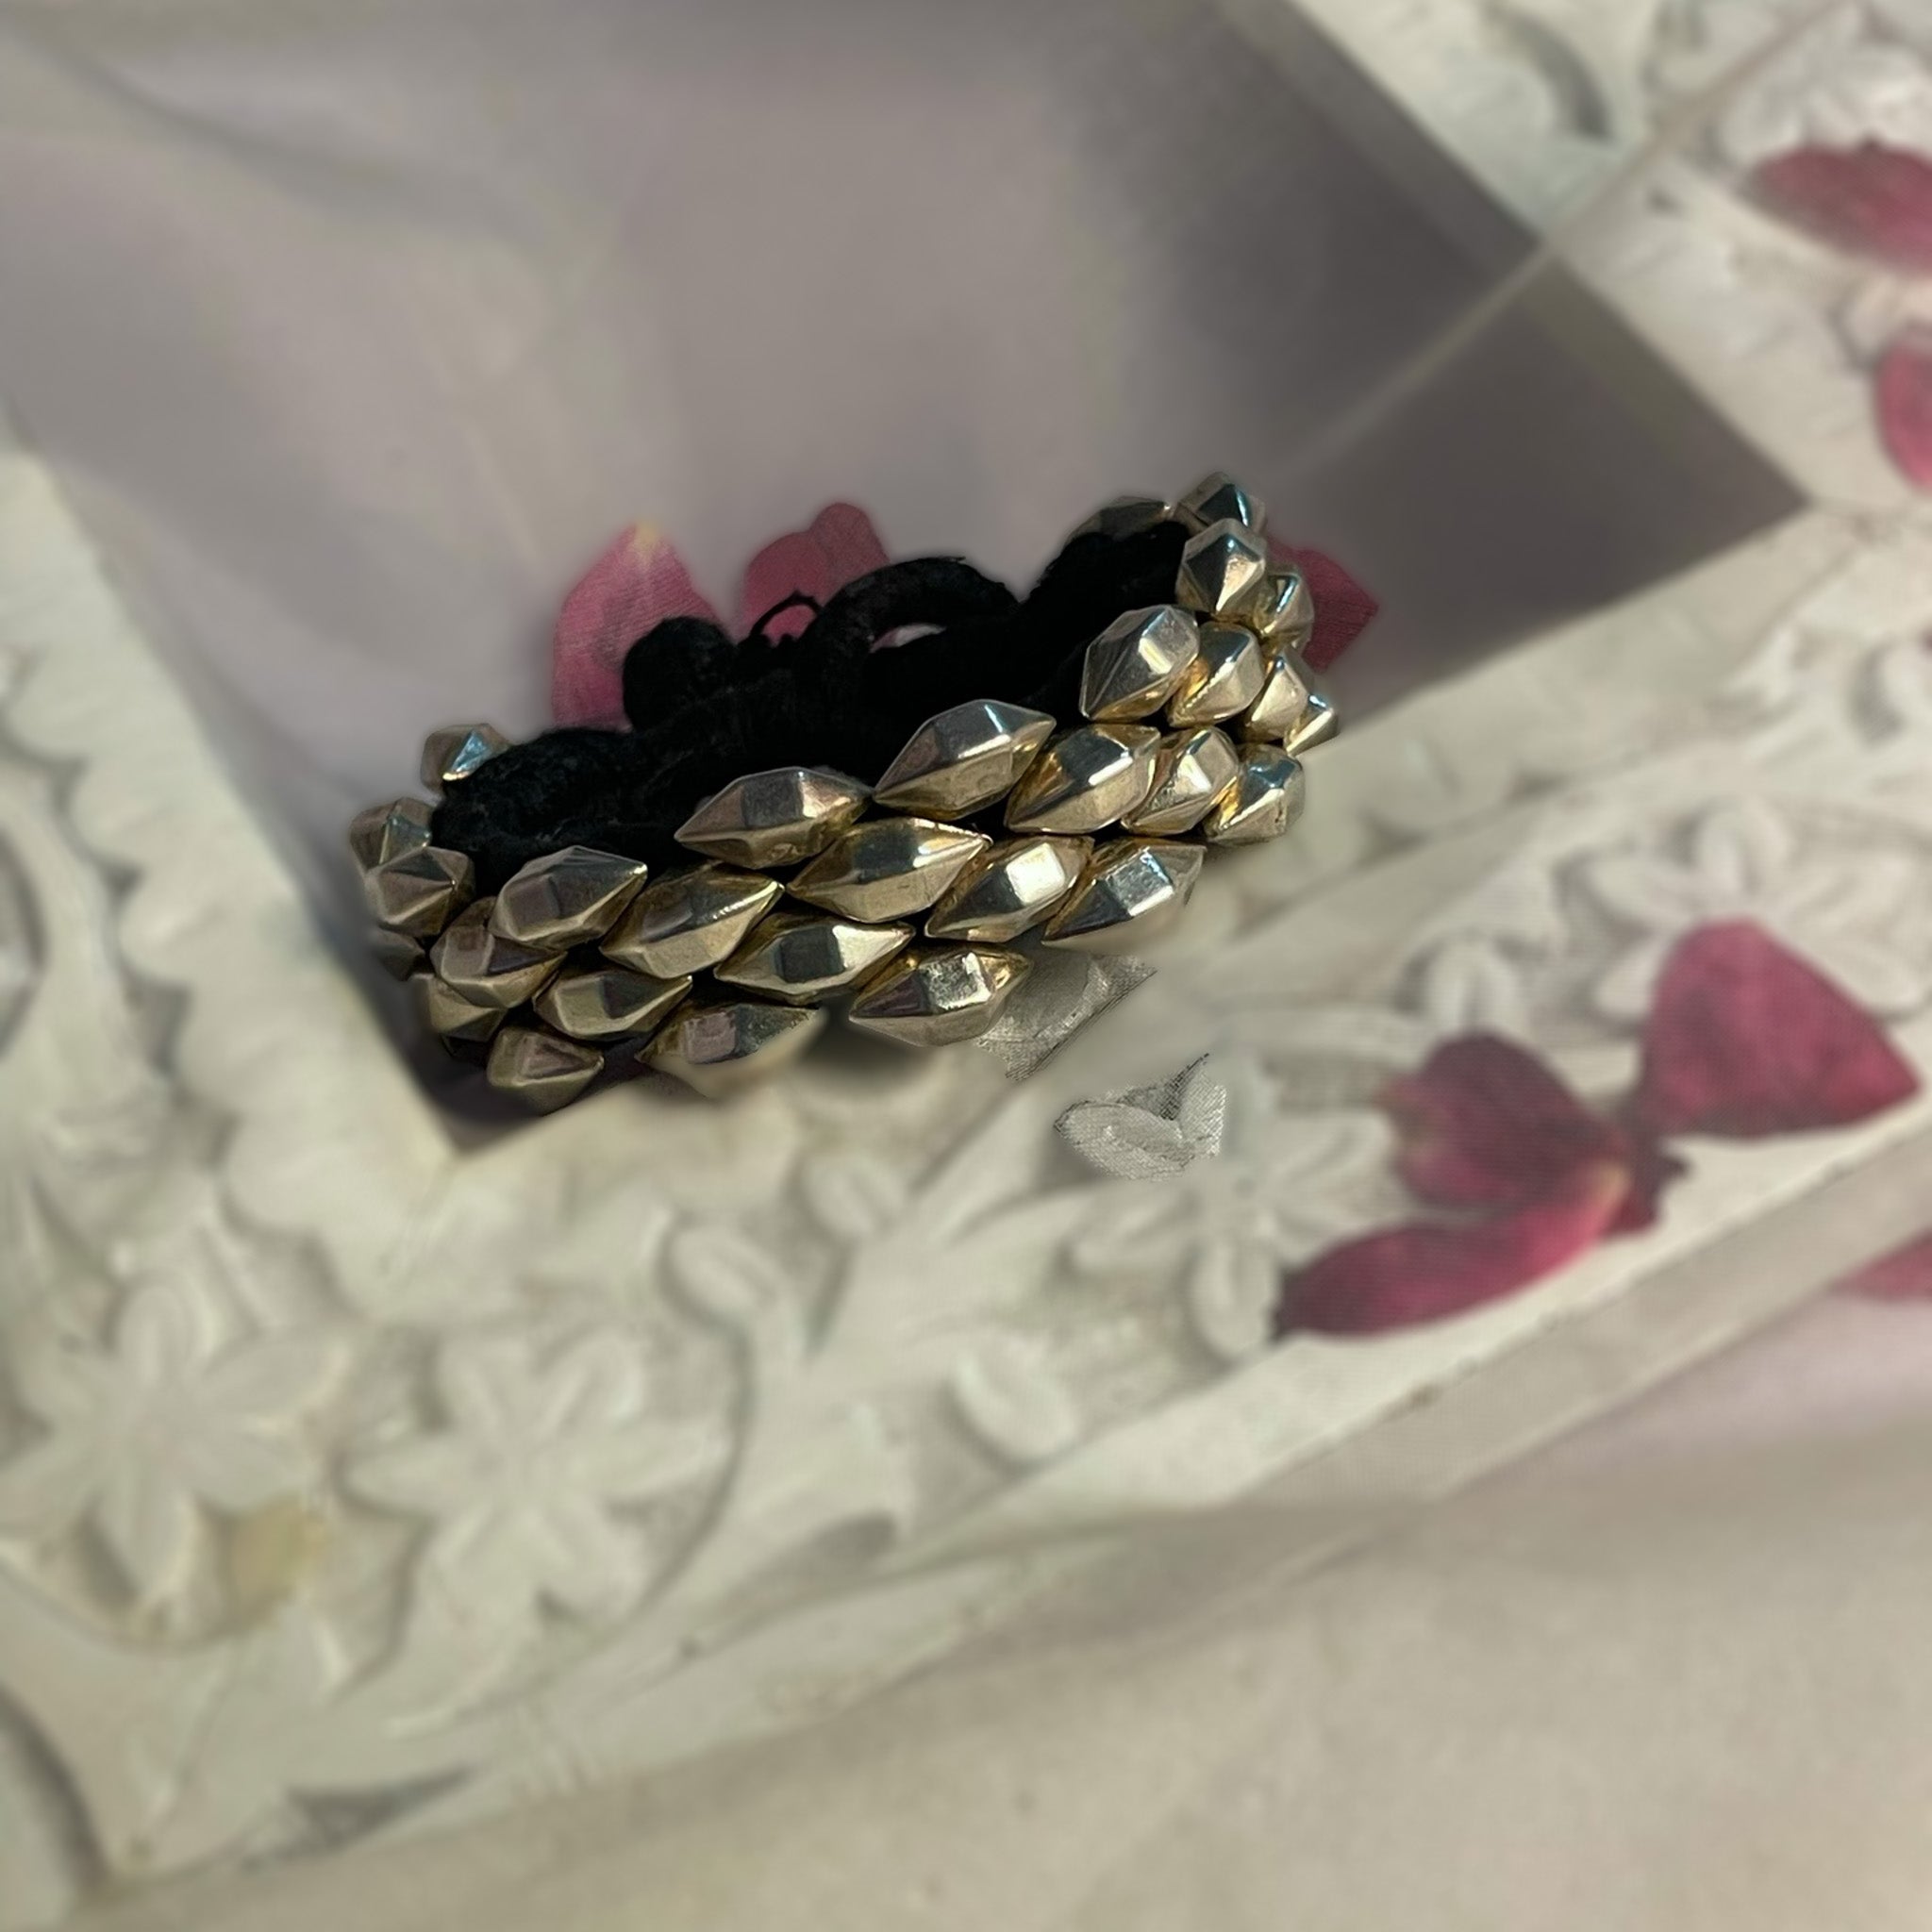 Buy Silver Shine Rose Gold Metal Bracelet Damru Pendent Bracelet Jewelry  For Girls And Women Jewelry Online at Low Prices in India - Paytmmall.com